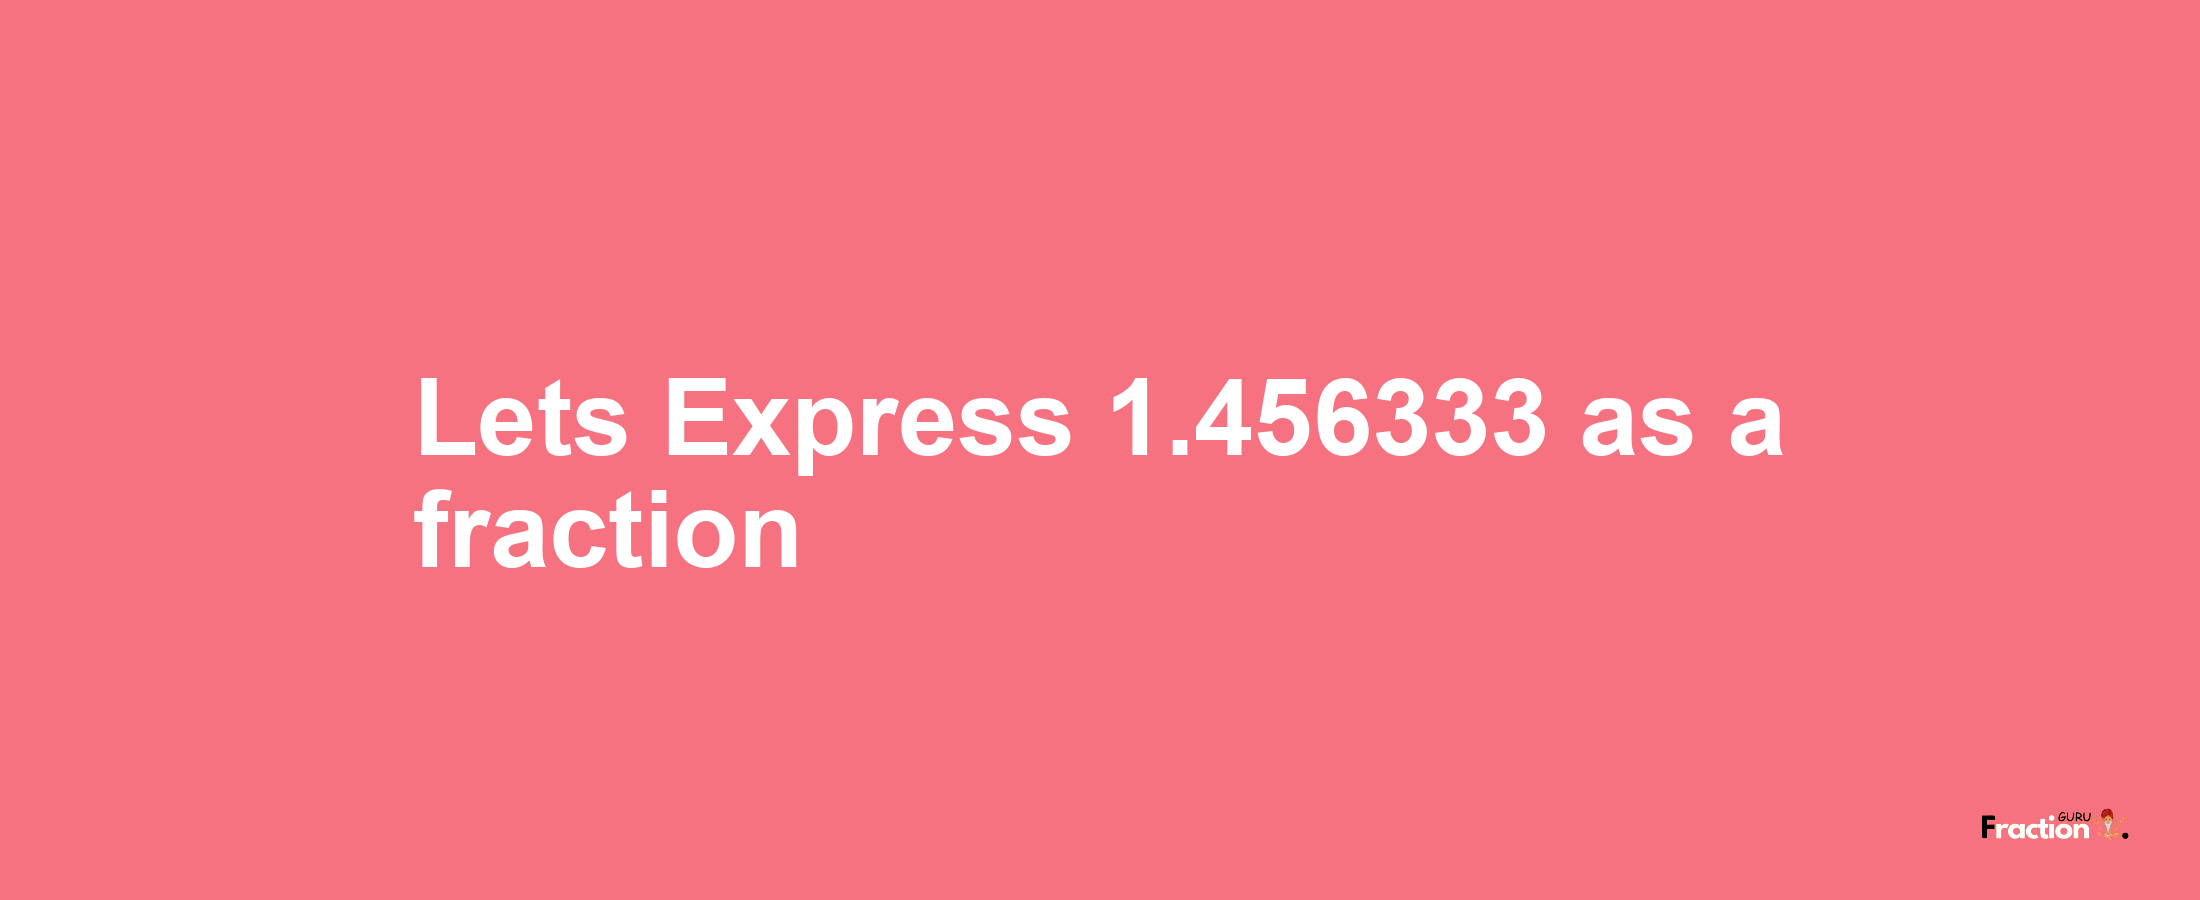 Lets Express 1.456333 as afraction